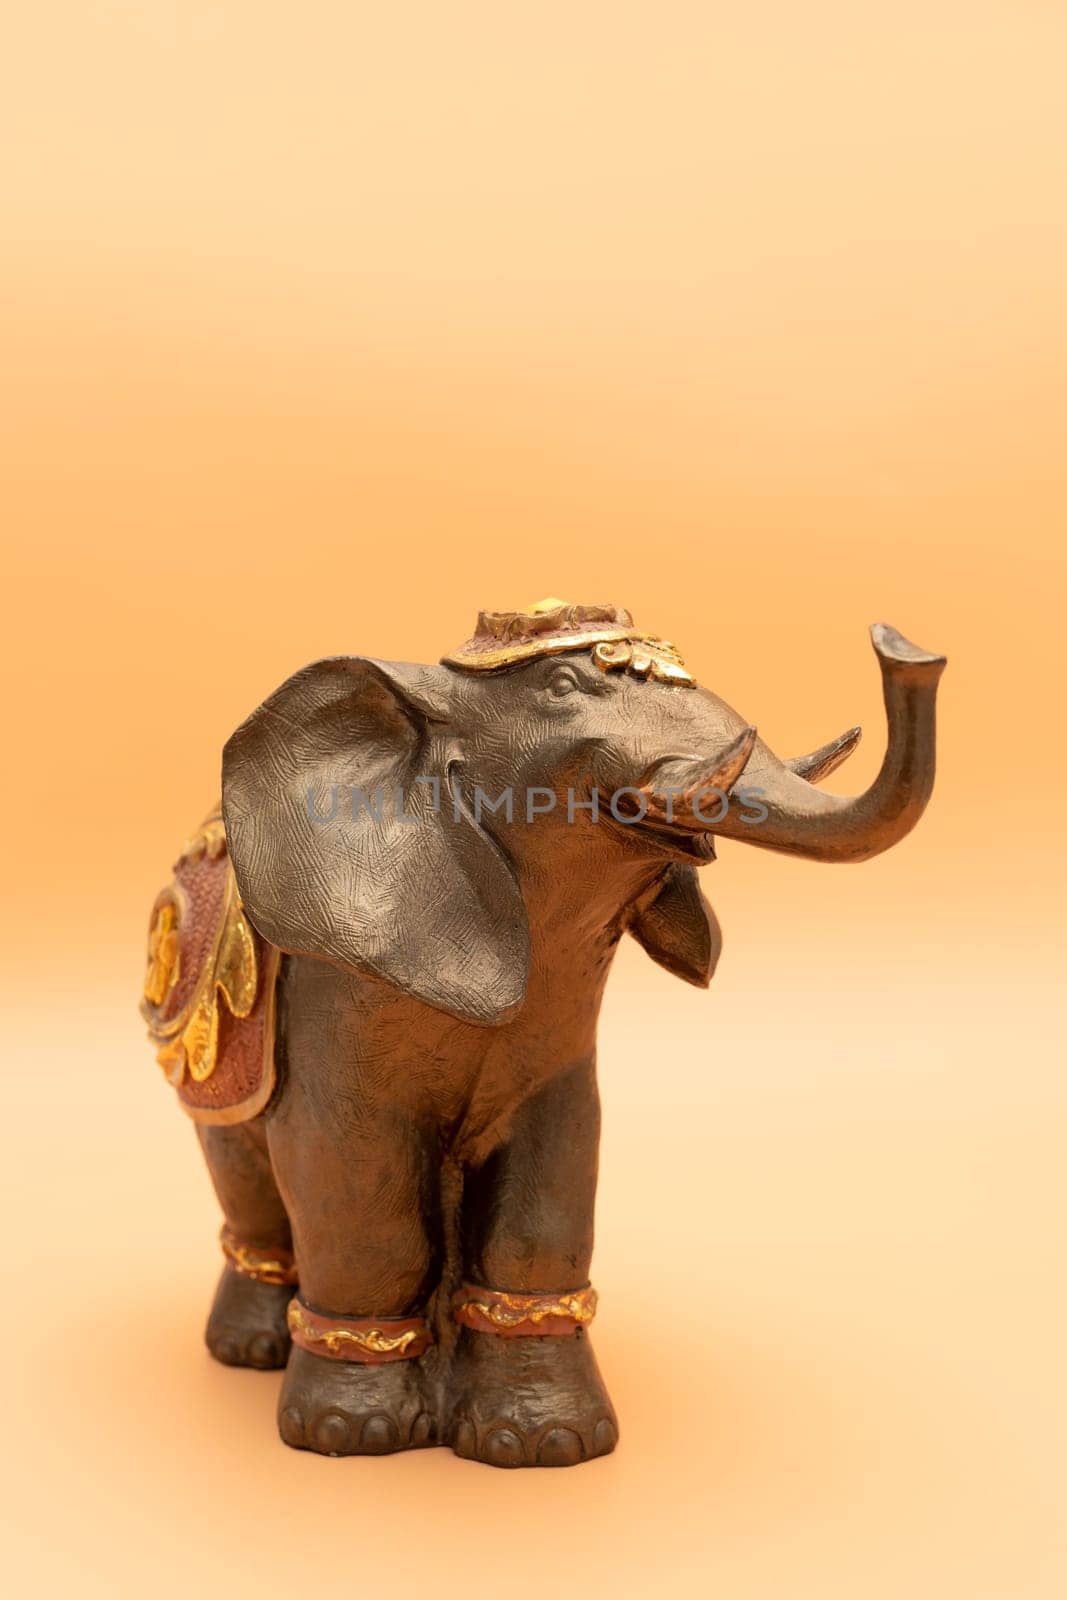 Template World Elephant Day. Bronze Decorated Elephant On Peach Yellow Background. Copy Space For Text. Ganesha Chaturthi Holiday. Sacred Symbol In Hindu, Buddhist Religions. Design, Vertical Plane. by netatsi